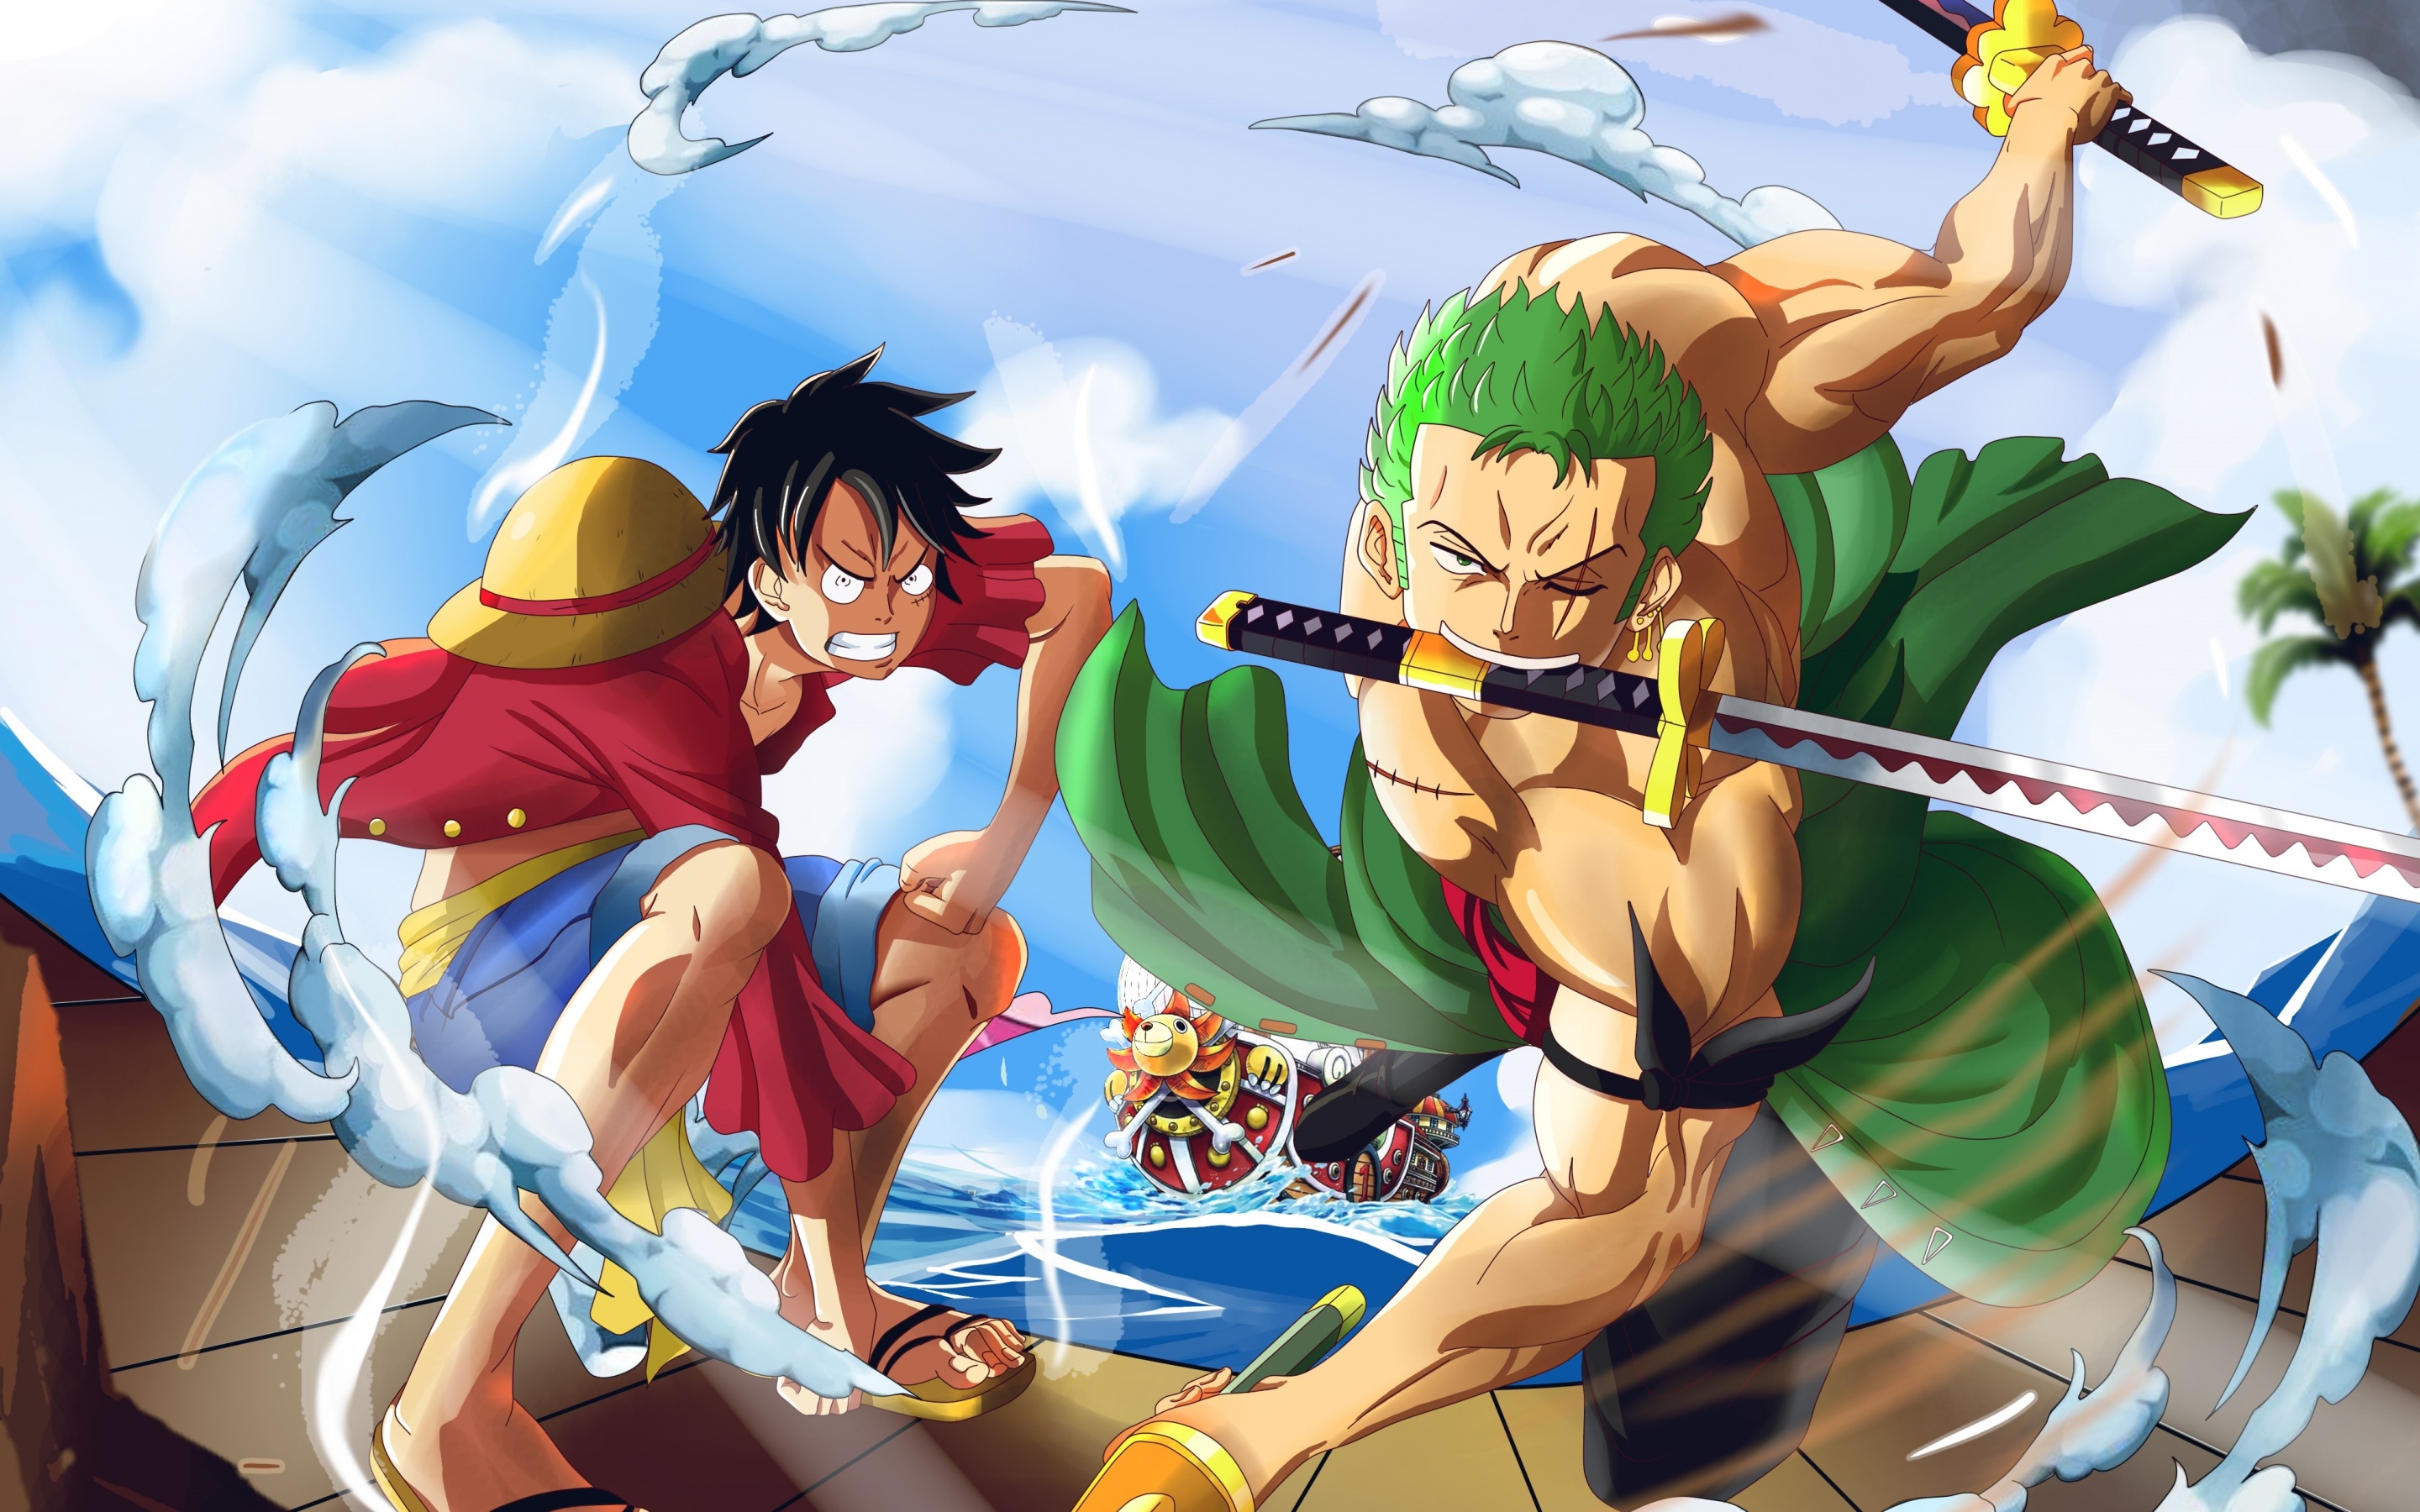 Luffy Zoro 4k Wallpapers - Wallpaper Cave